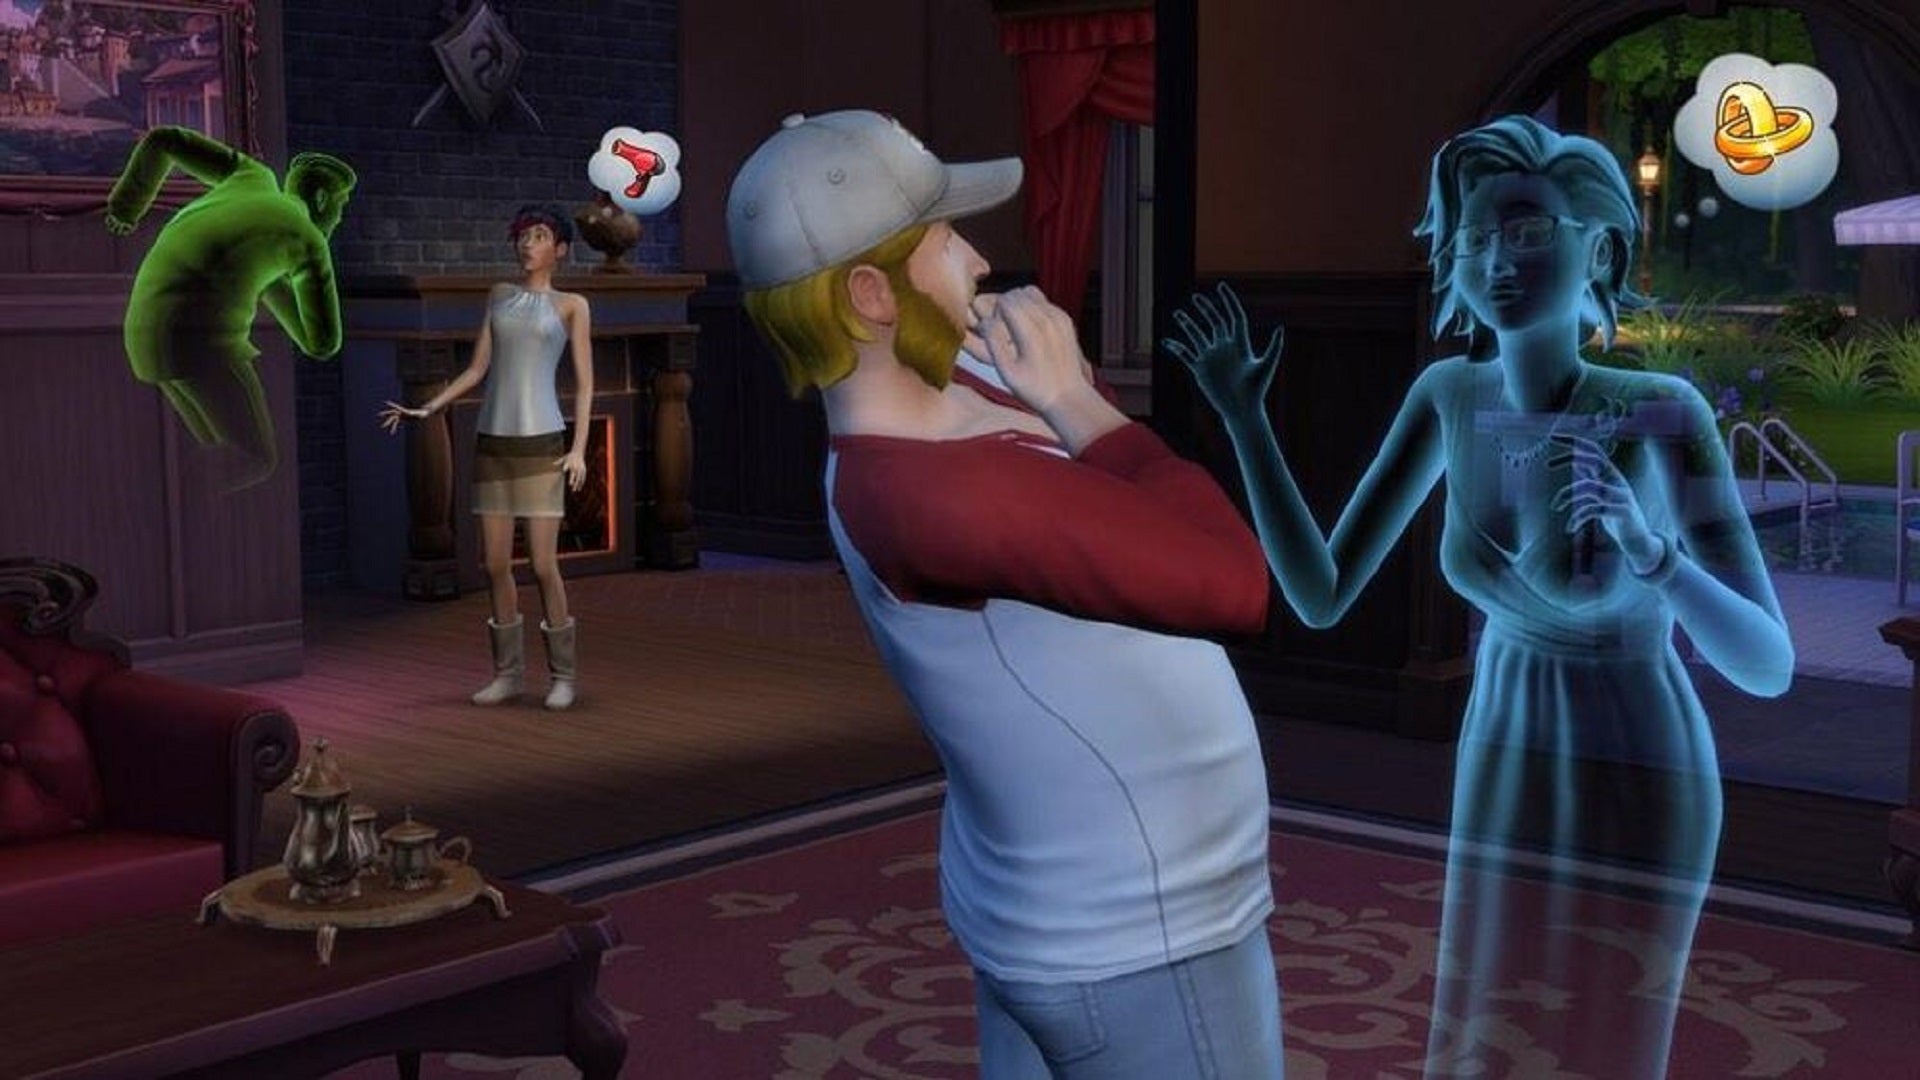 Living Sims being scared by ghosts in The Sims 4.